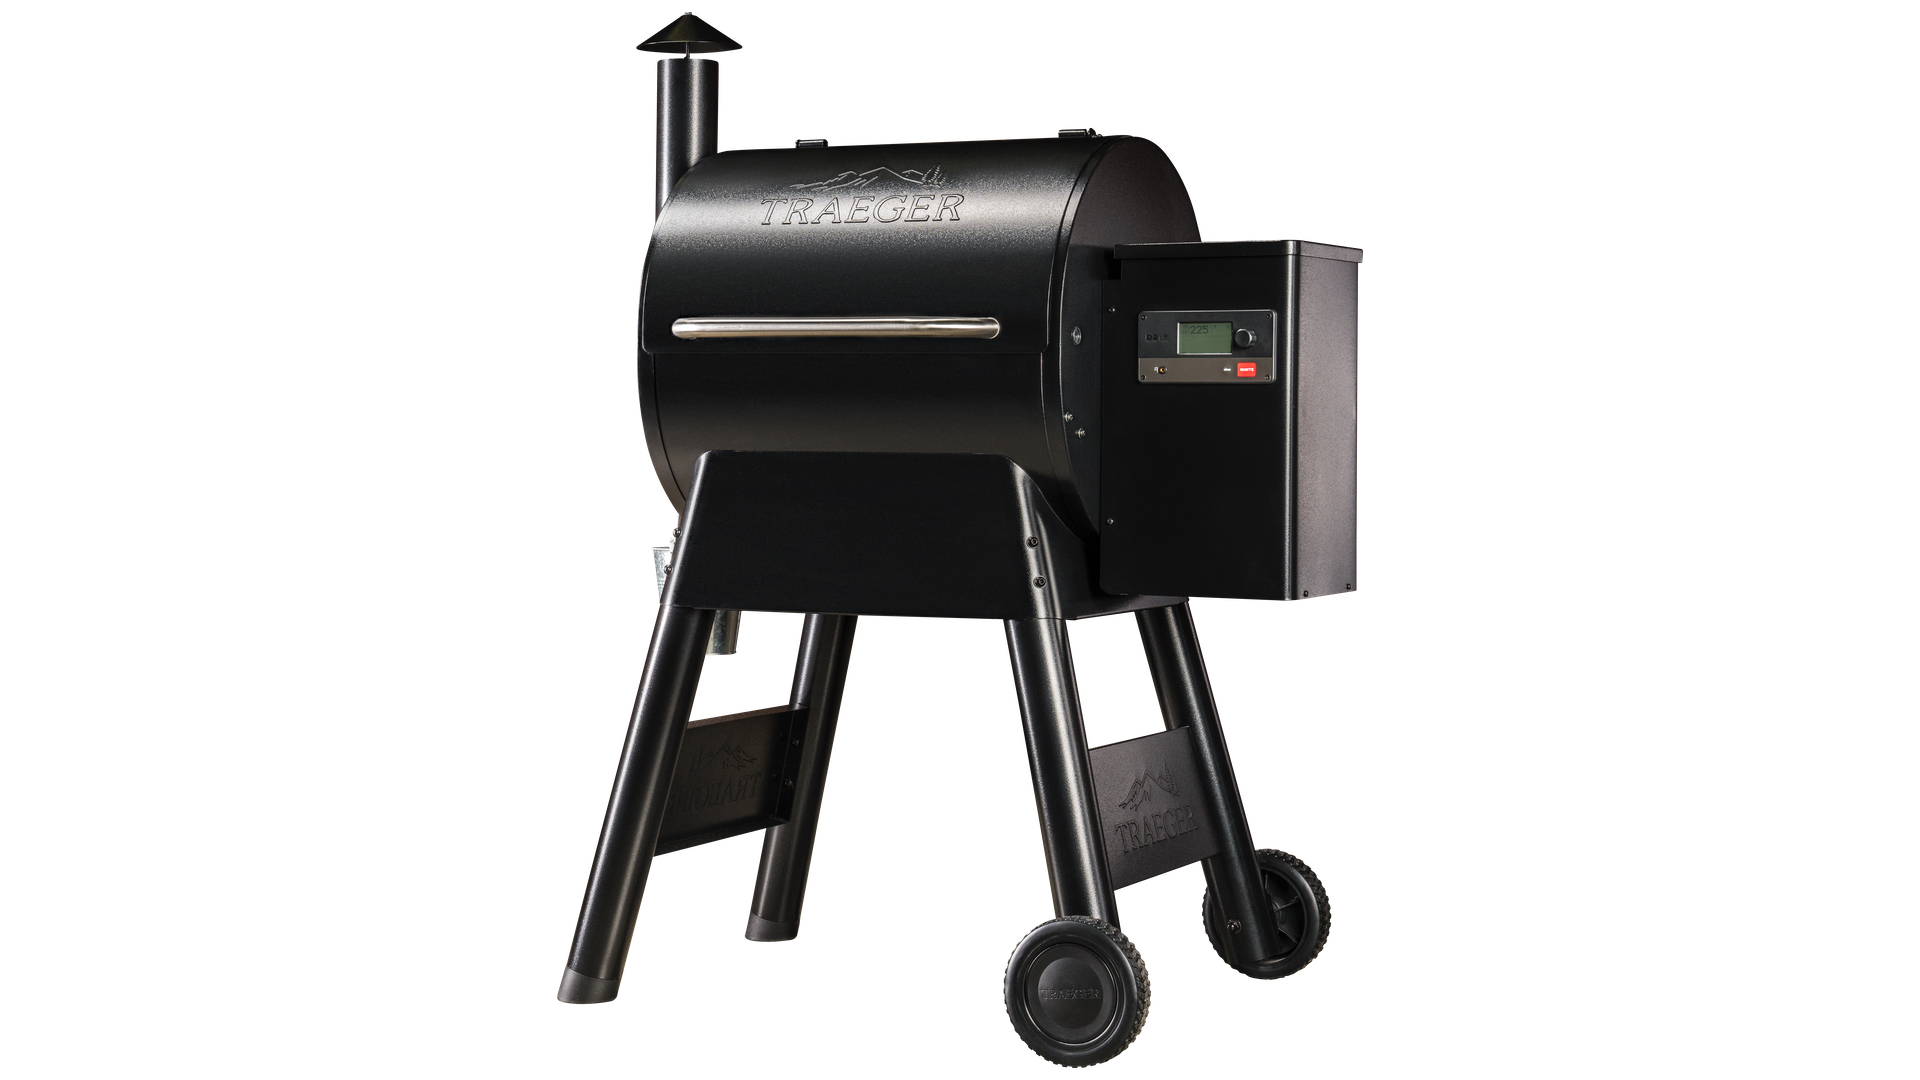 Traeger Pro 575 Review This Pellet Grill Is A Smoker Barbecue And Cast Iron Cooking Colossus T3